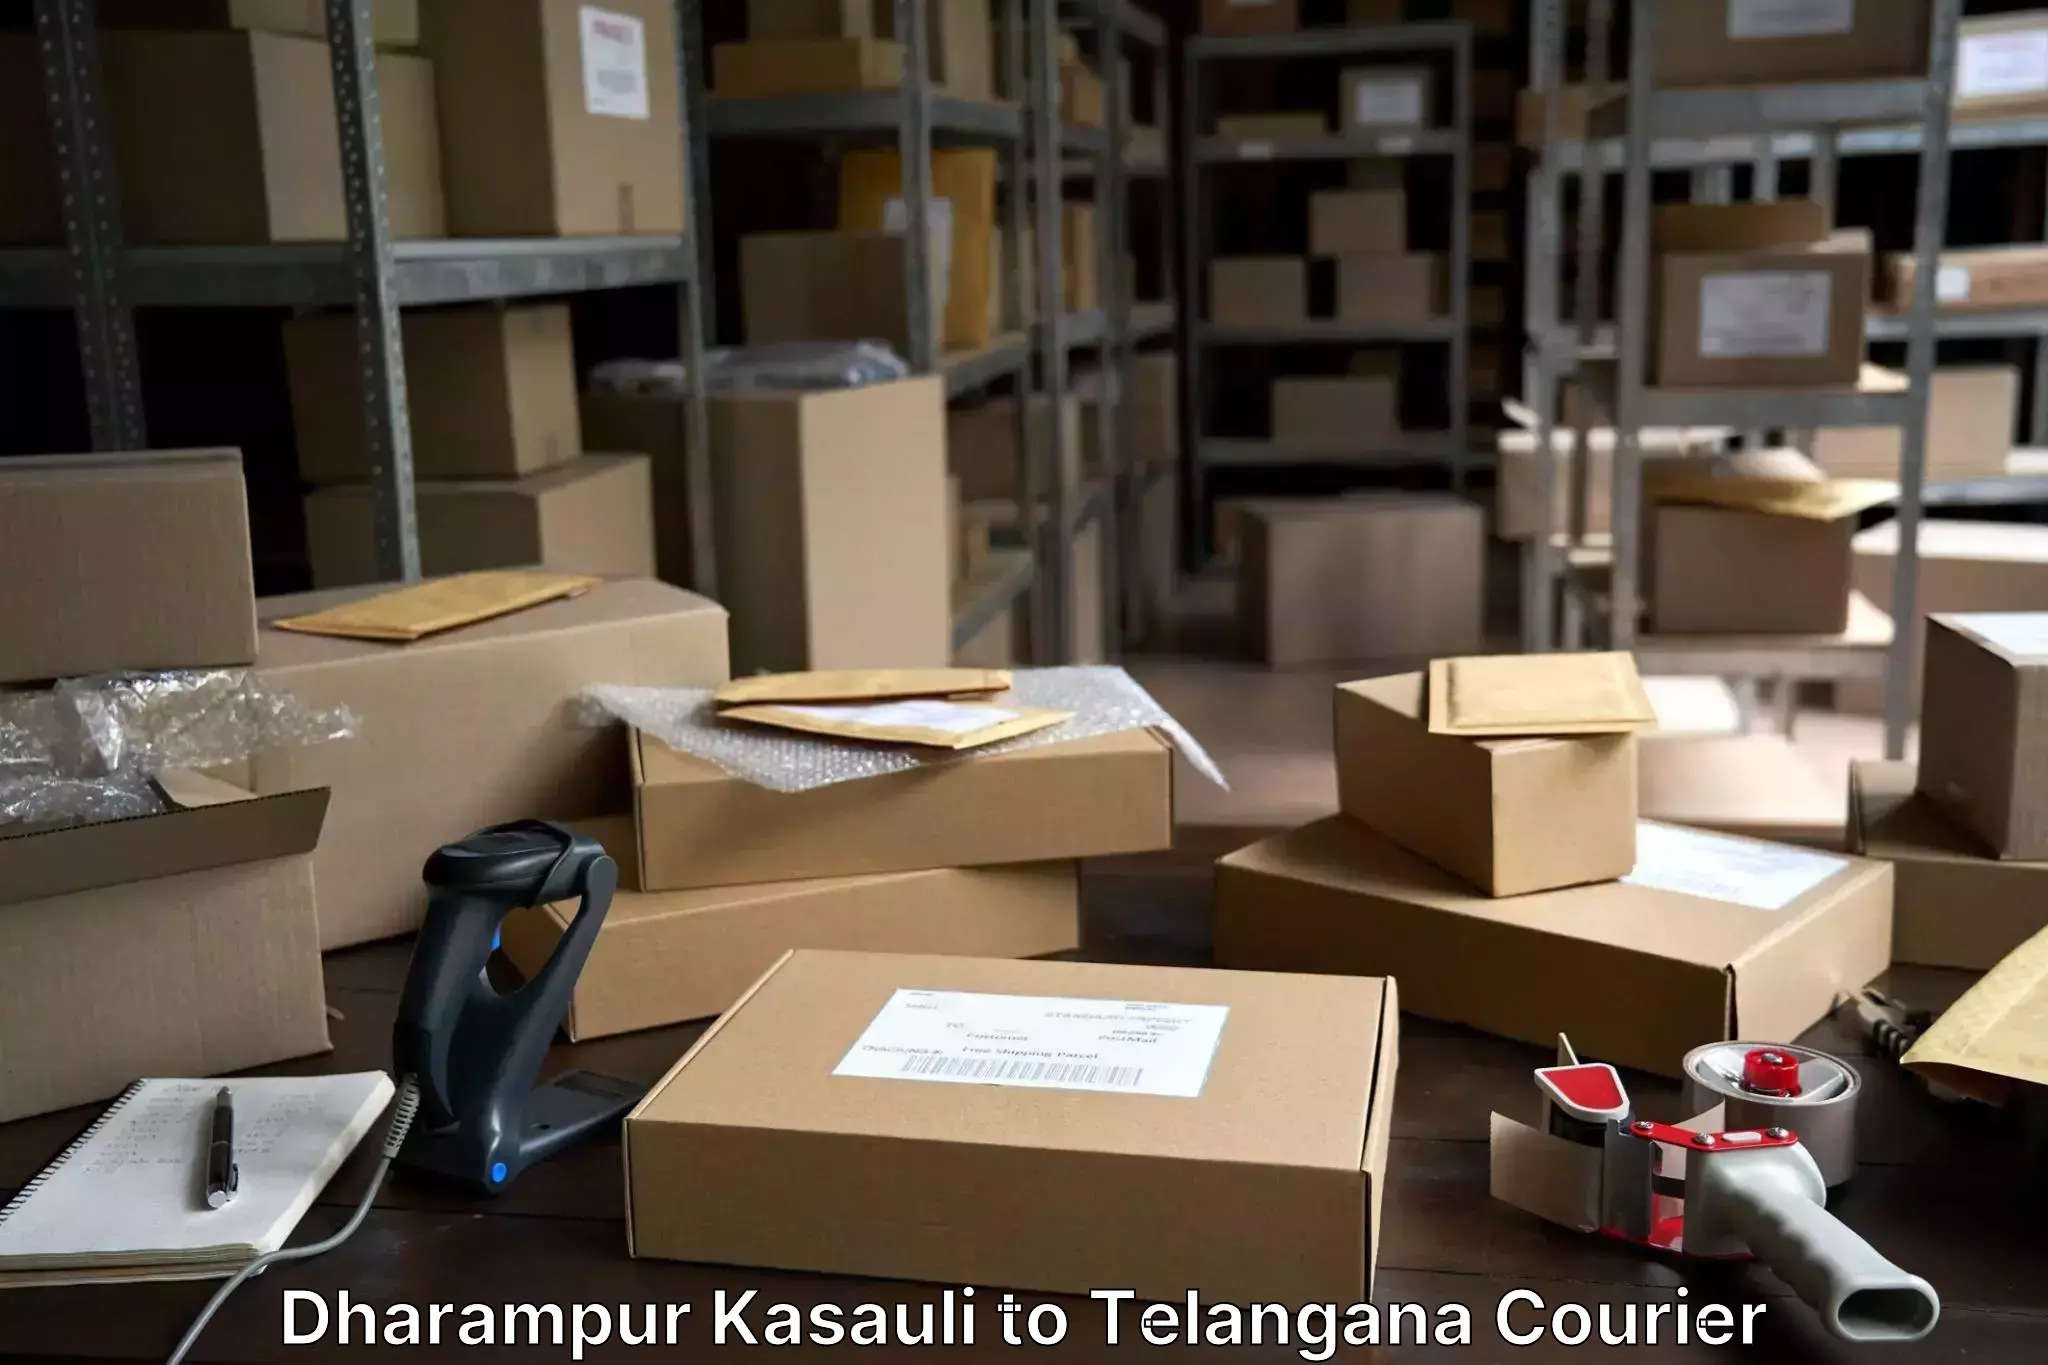 Personal effects shipping in Dharampur Kasauli to Gollapalli